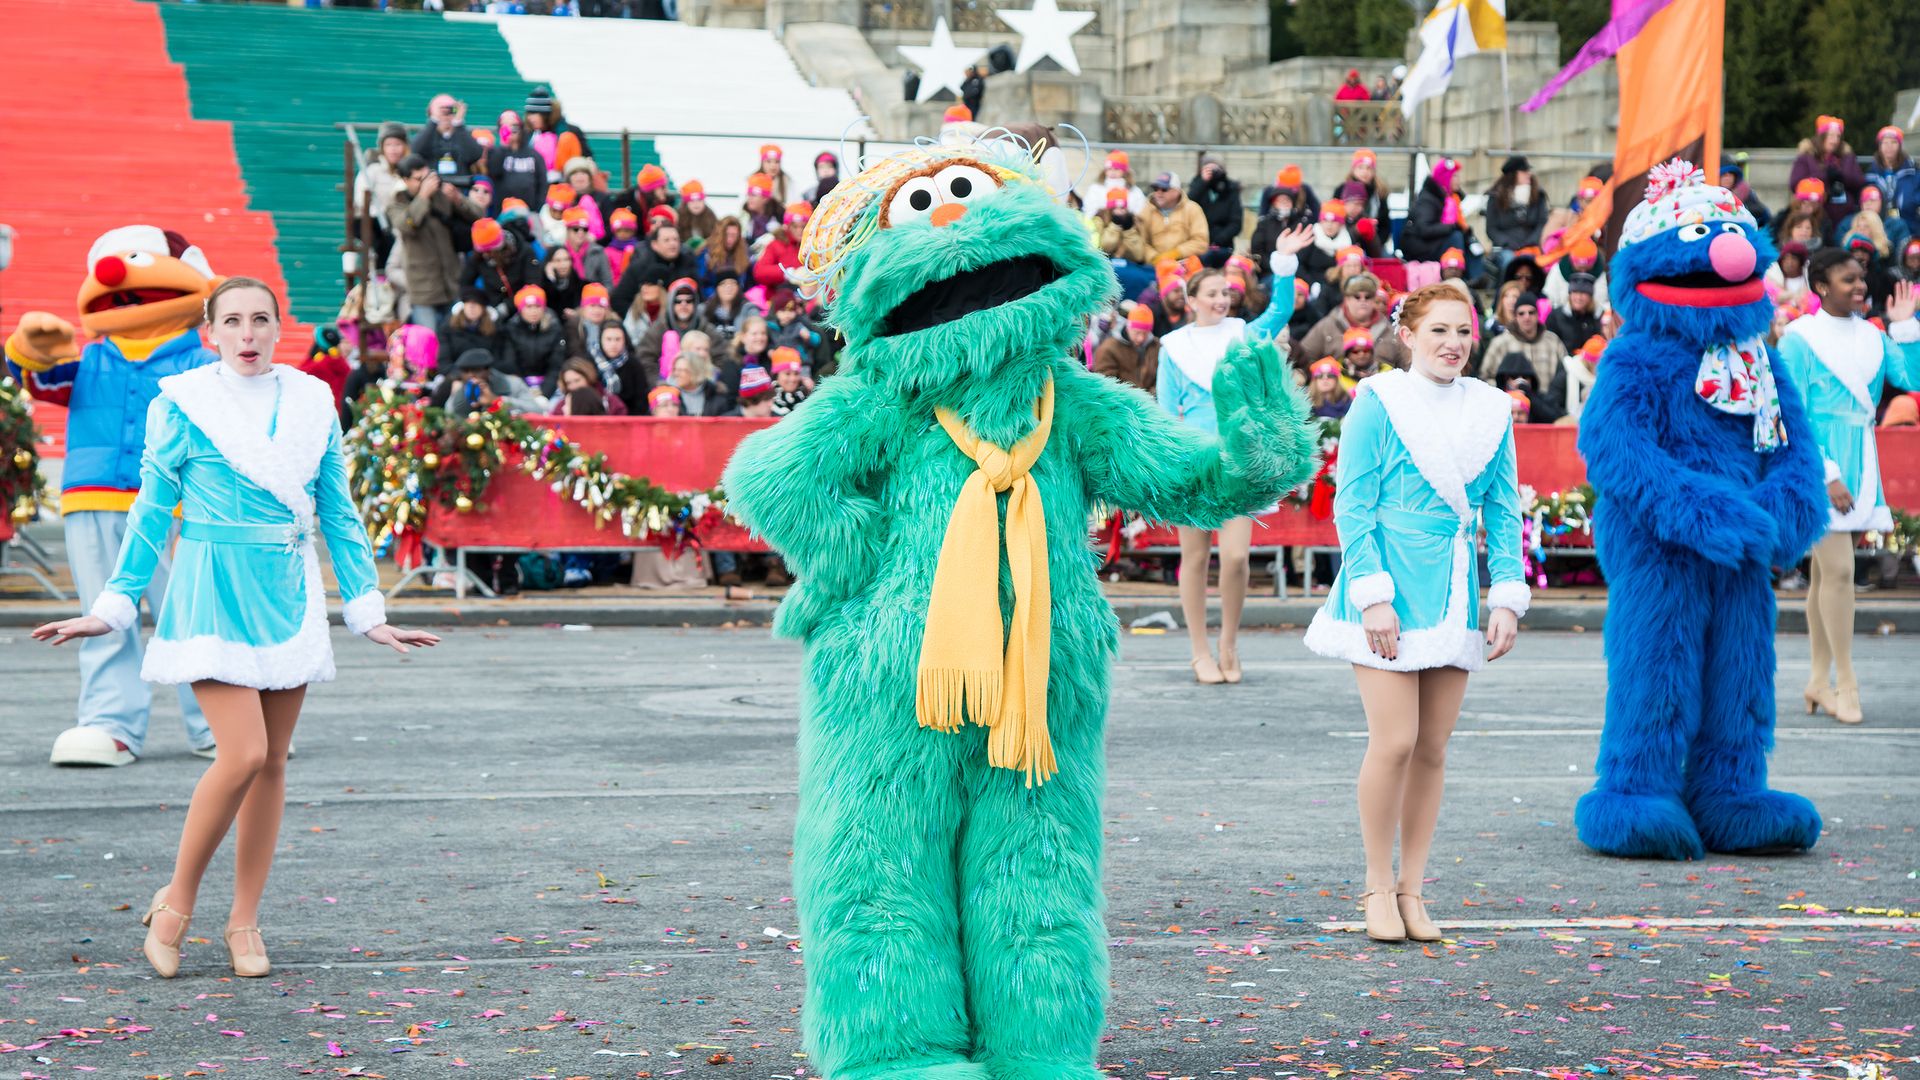 Photo of Rosita from Sesame Street, a green furry character, dancing in a parade